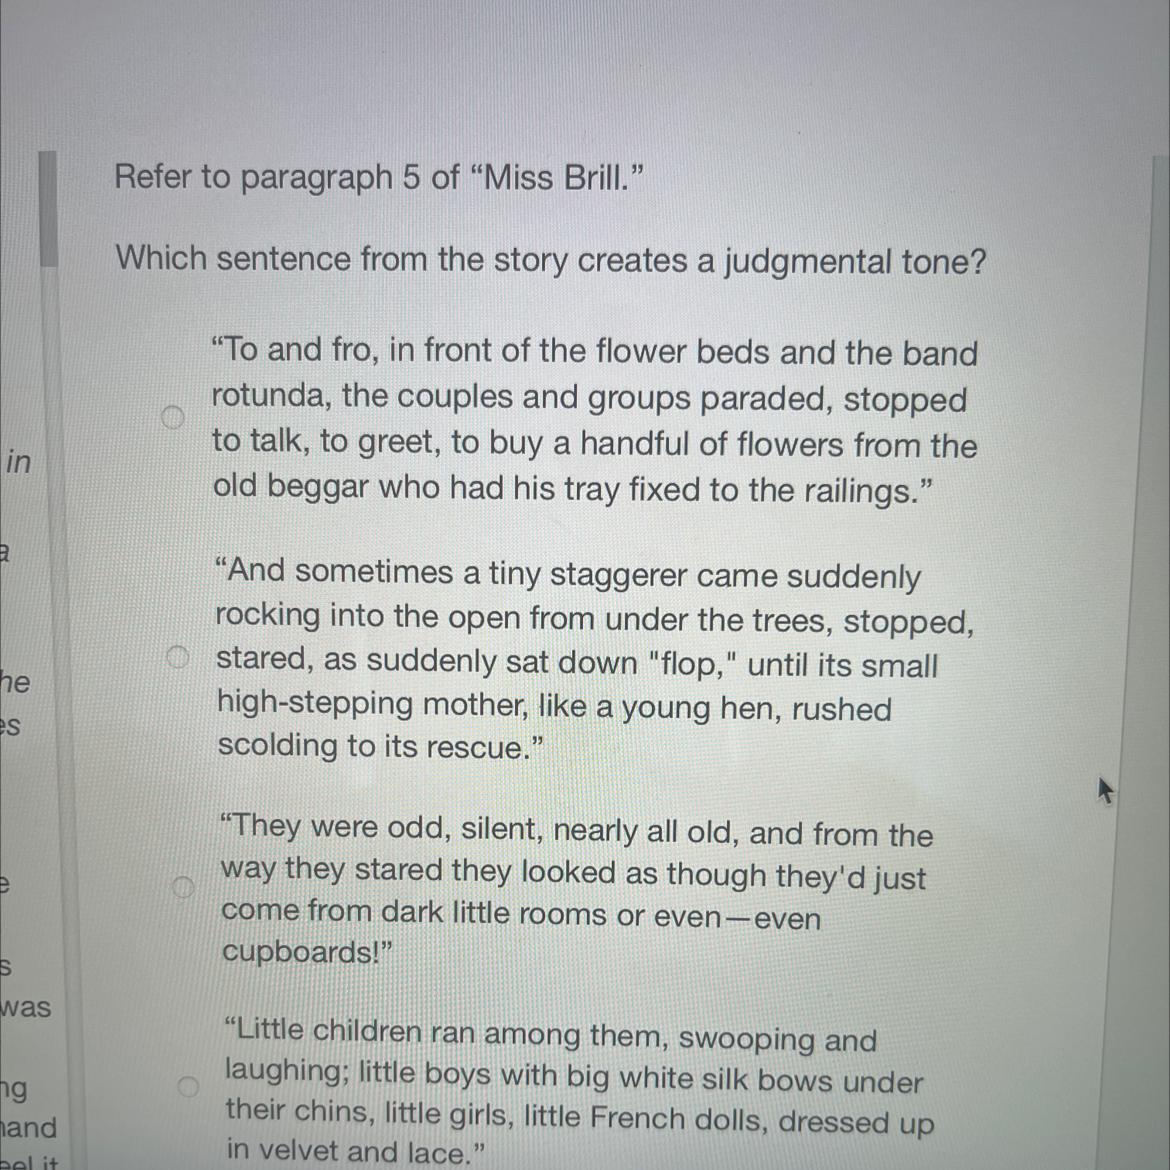 Refer To Paragraph 5 Of "Miss Brill."Which Sentence From The Story Creates A Judgmental Tone?